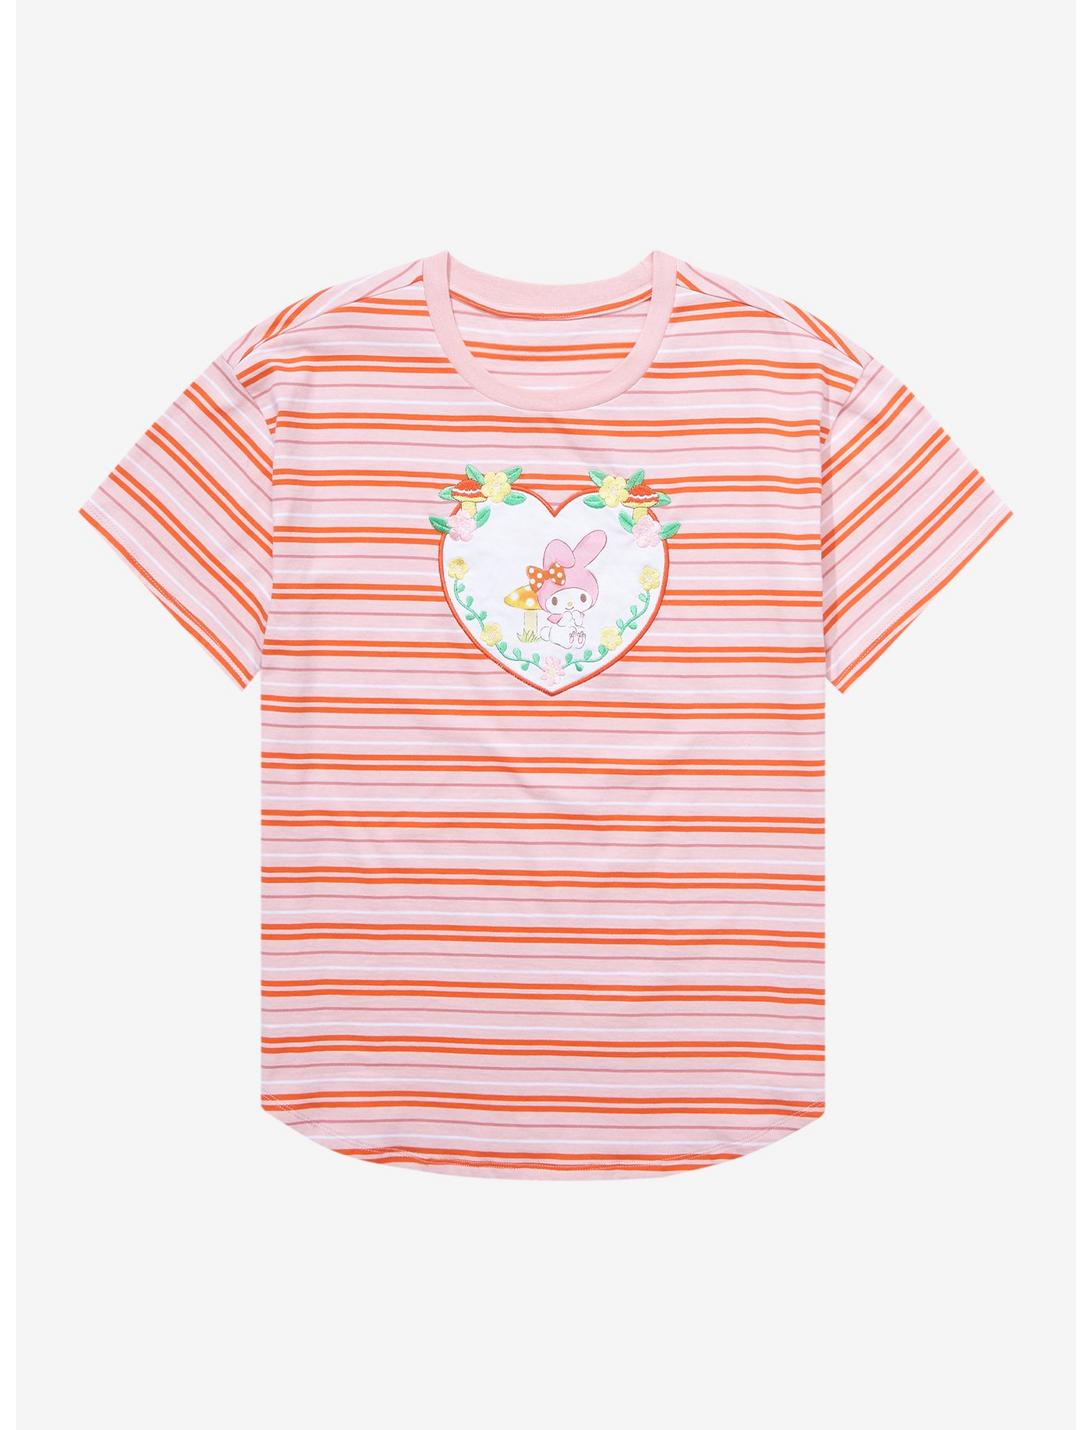 Sanrio Hello Kitty and Friends My Melody Heart Striped Women's Plus Size T-Shirt - BoxLunch Exclusive, MULTI, hi-res